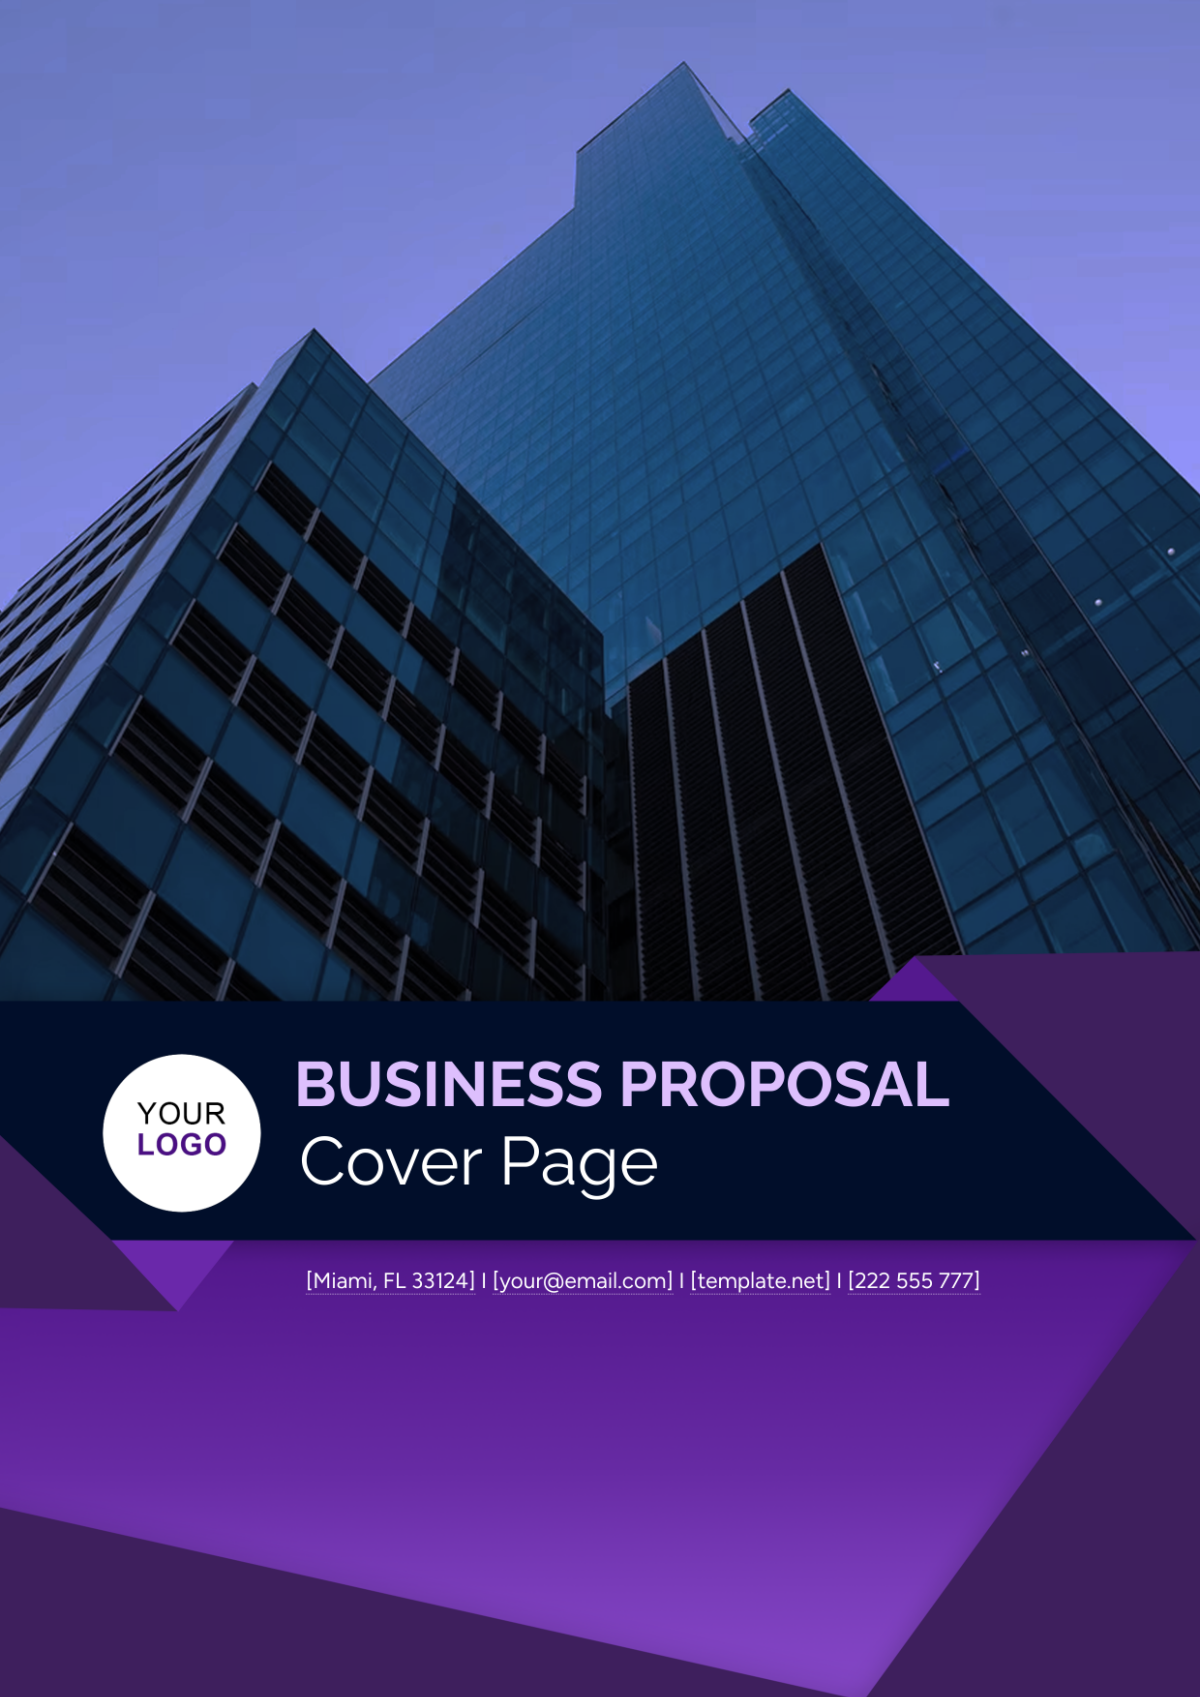 Business Proposal Cover Page